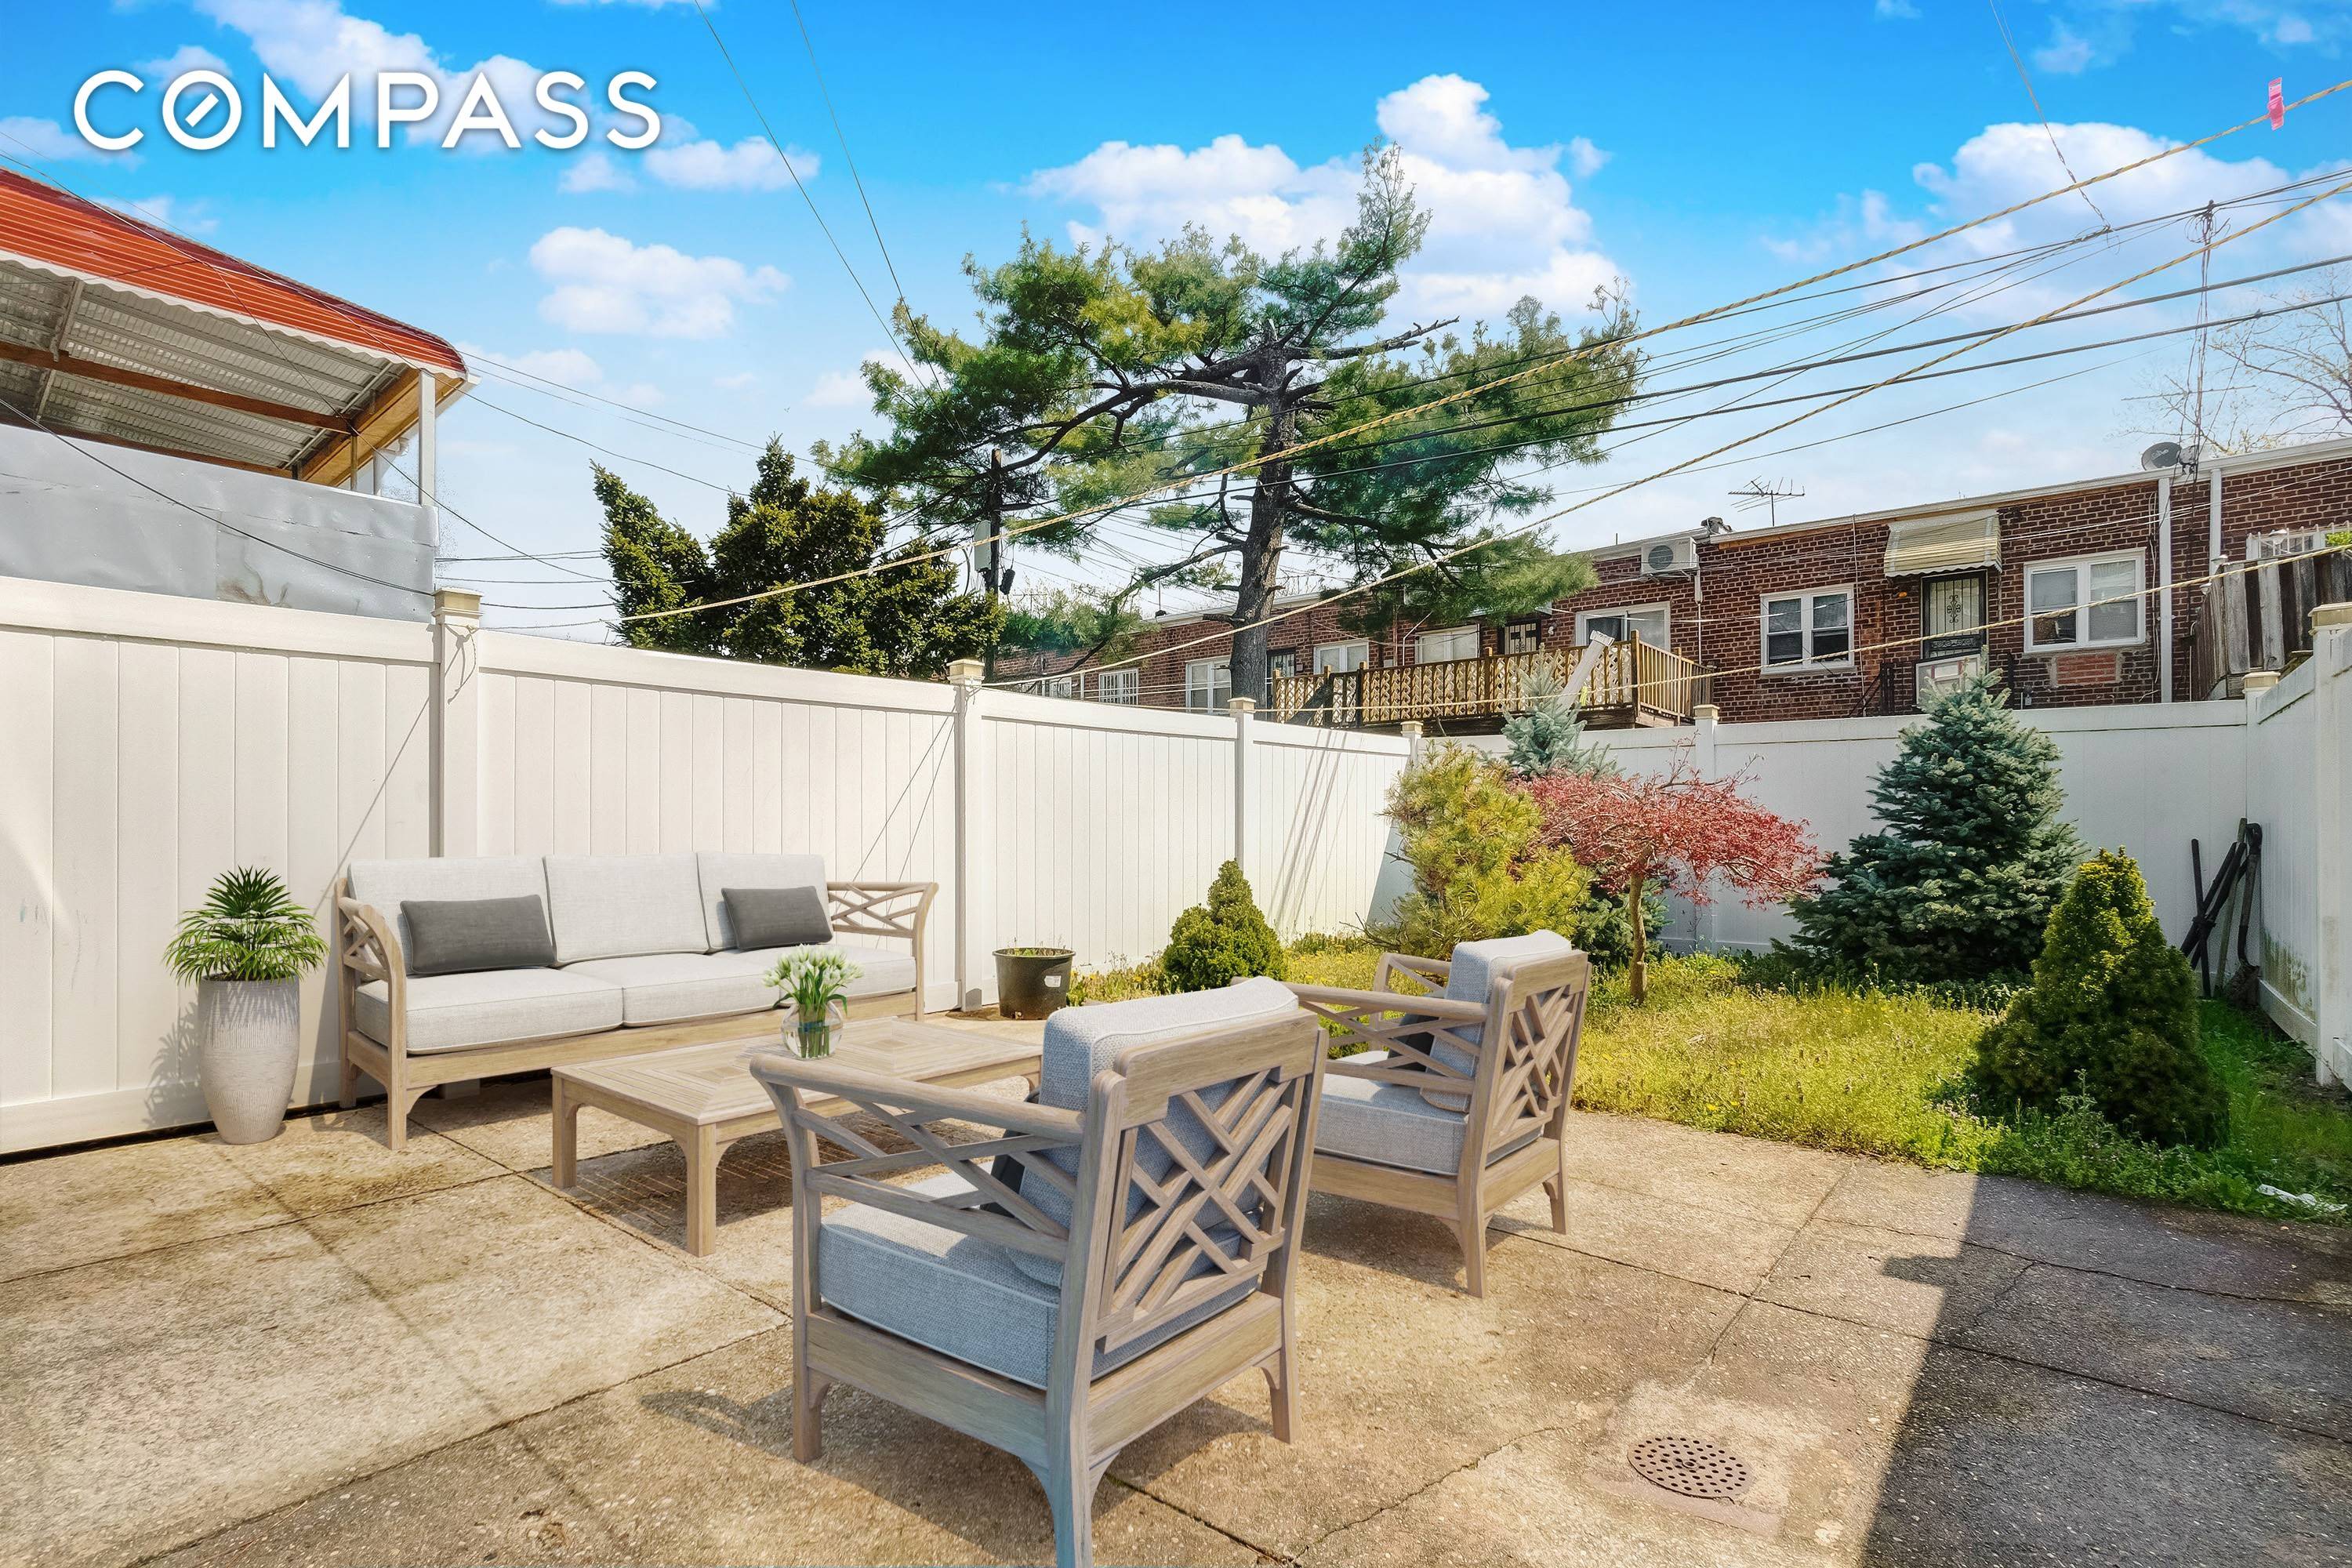 Welcome to 2371 Bragg Street, located in prime Sheepshead Bay this two family turn key brick home is the perfect place to call home.